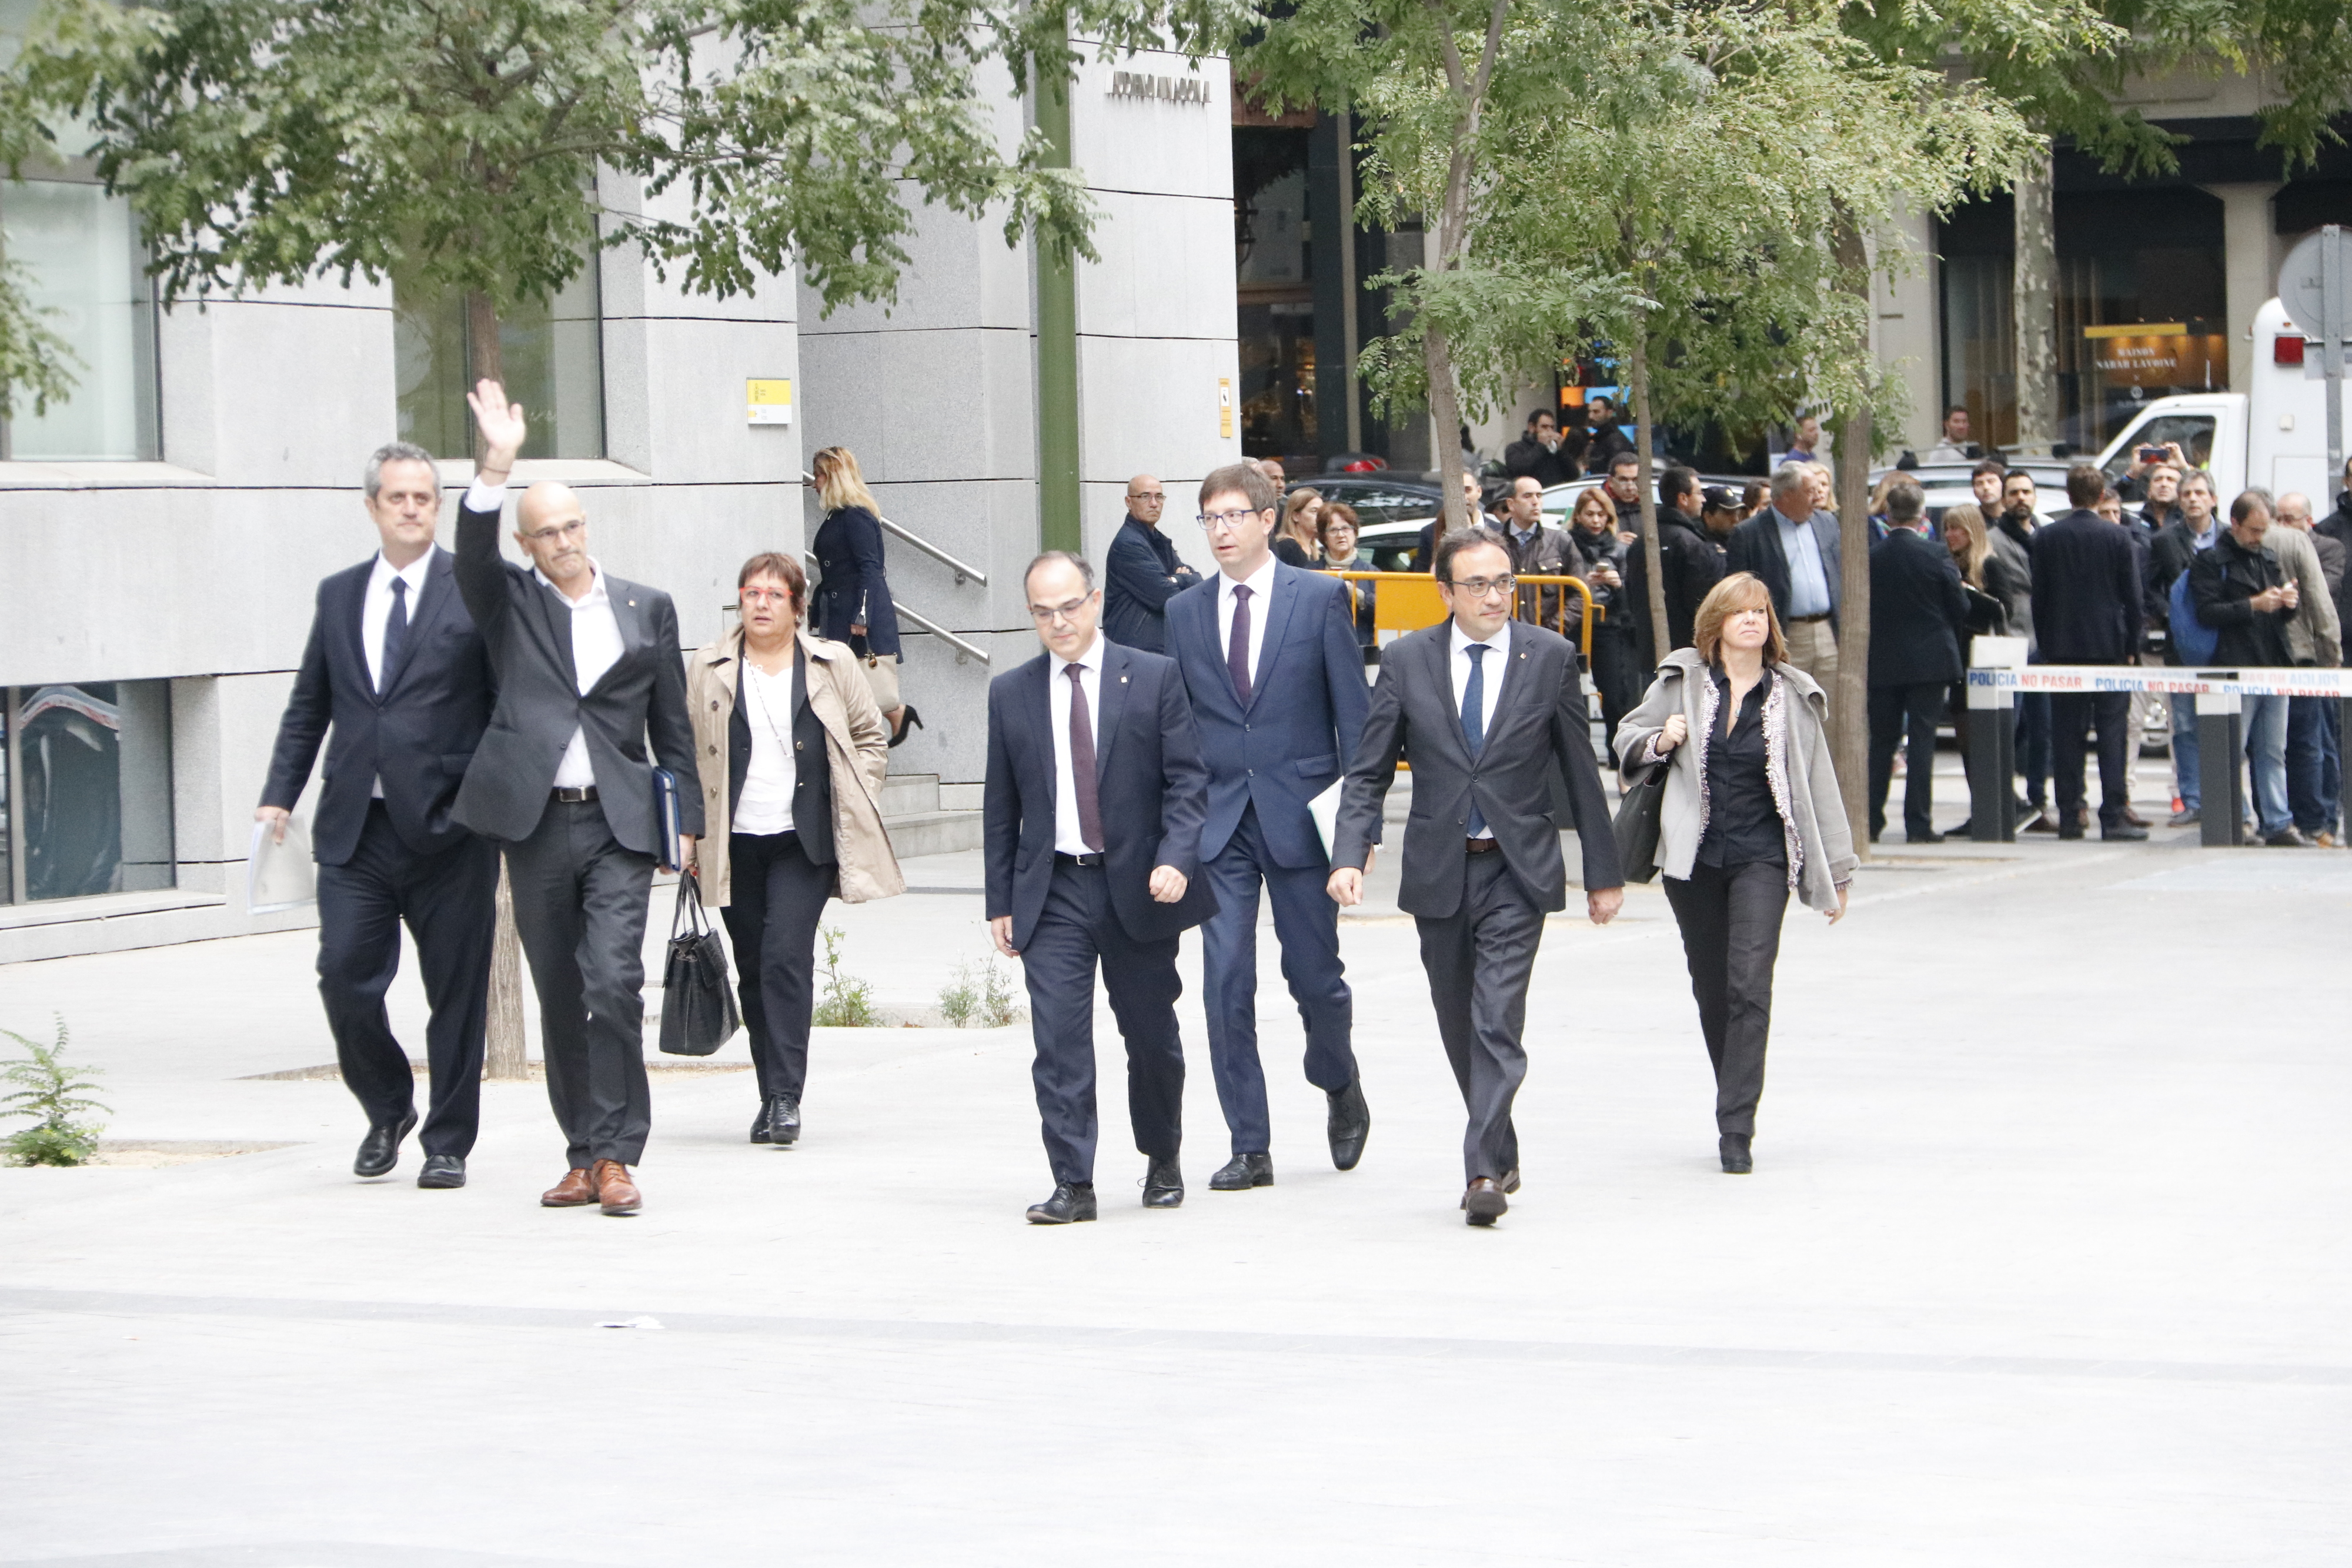 Catalan ministers arrive in Spain's National Court, charged for declaring independence (by Rafa Garrido)